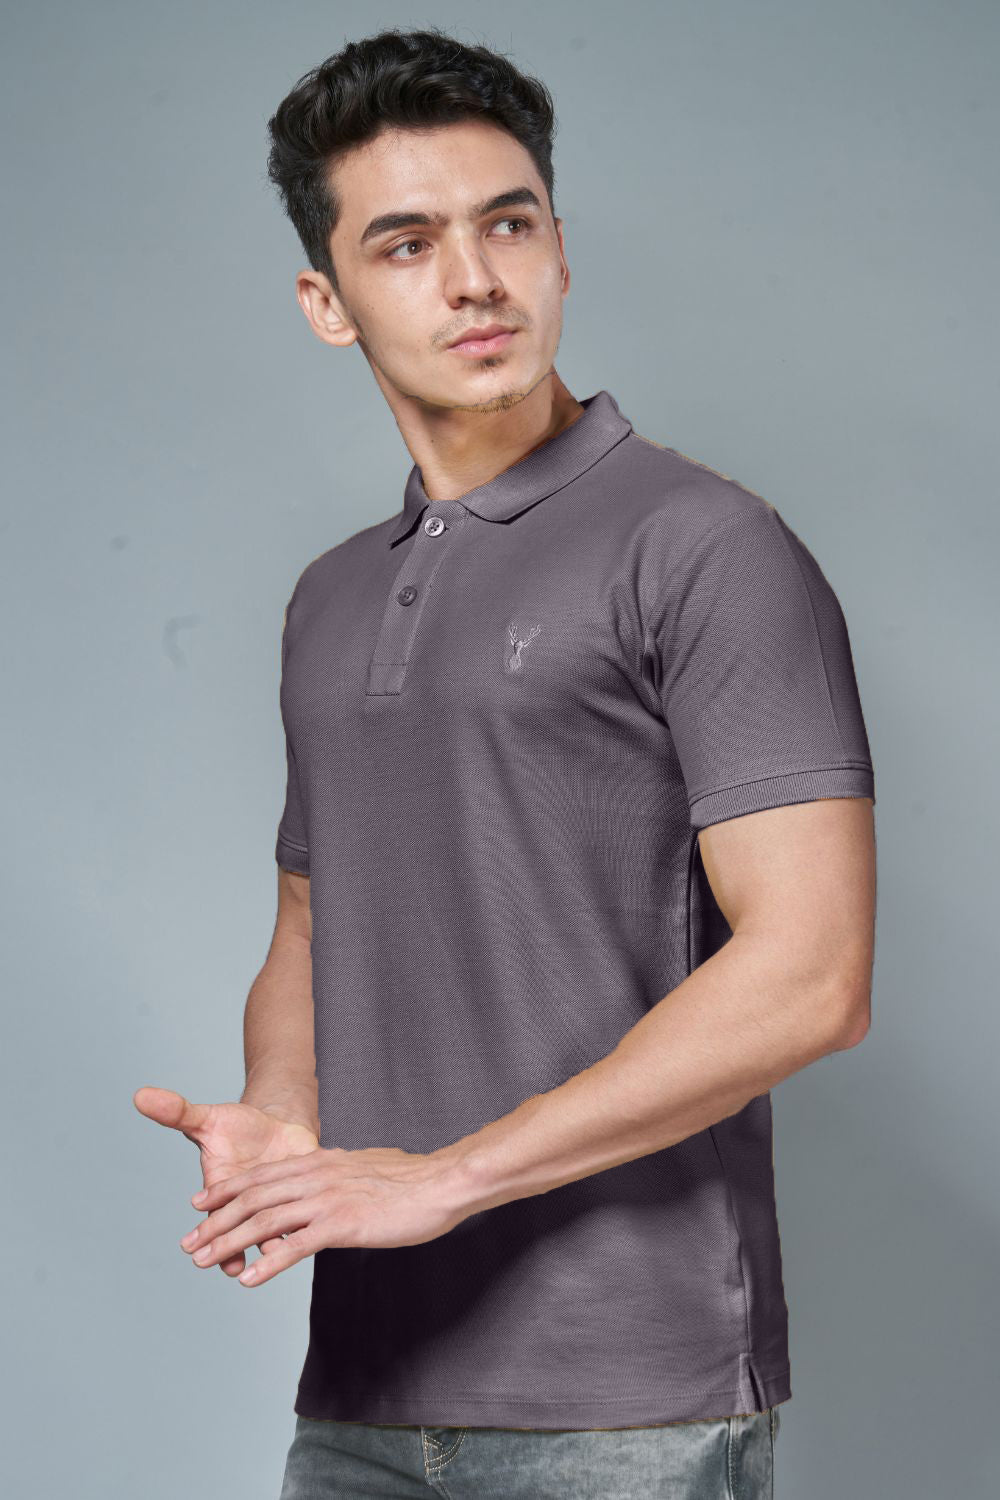 Grape colored, identity Polo T-shirts for men with collar and half sleeves, side view.